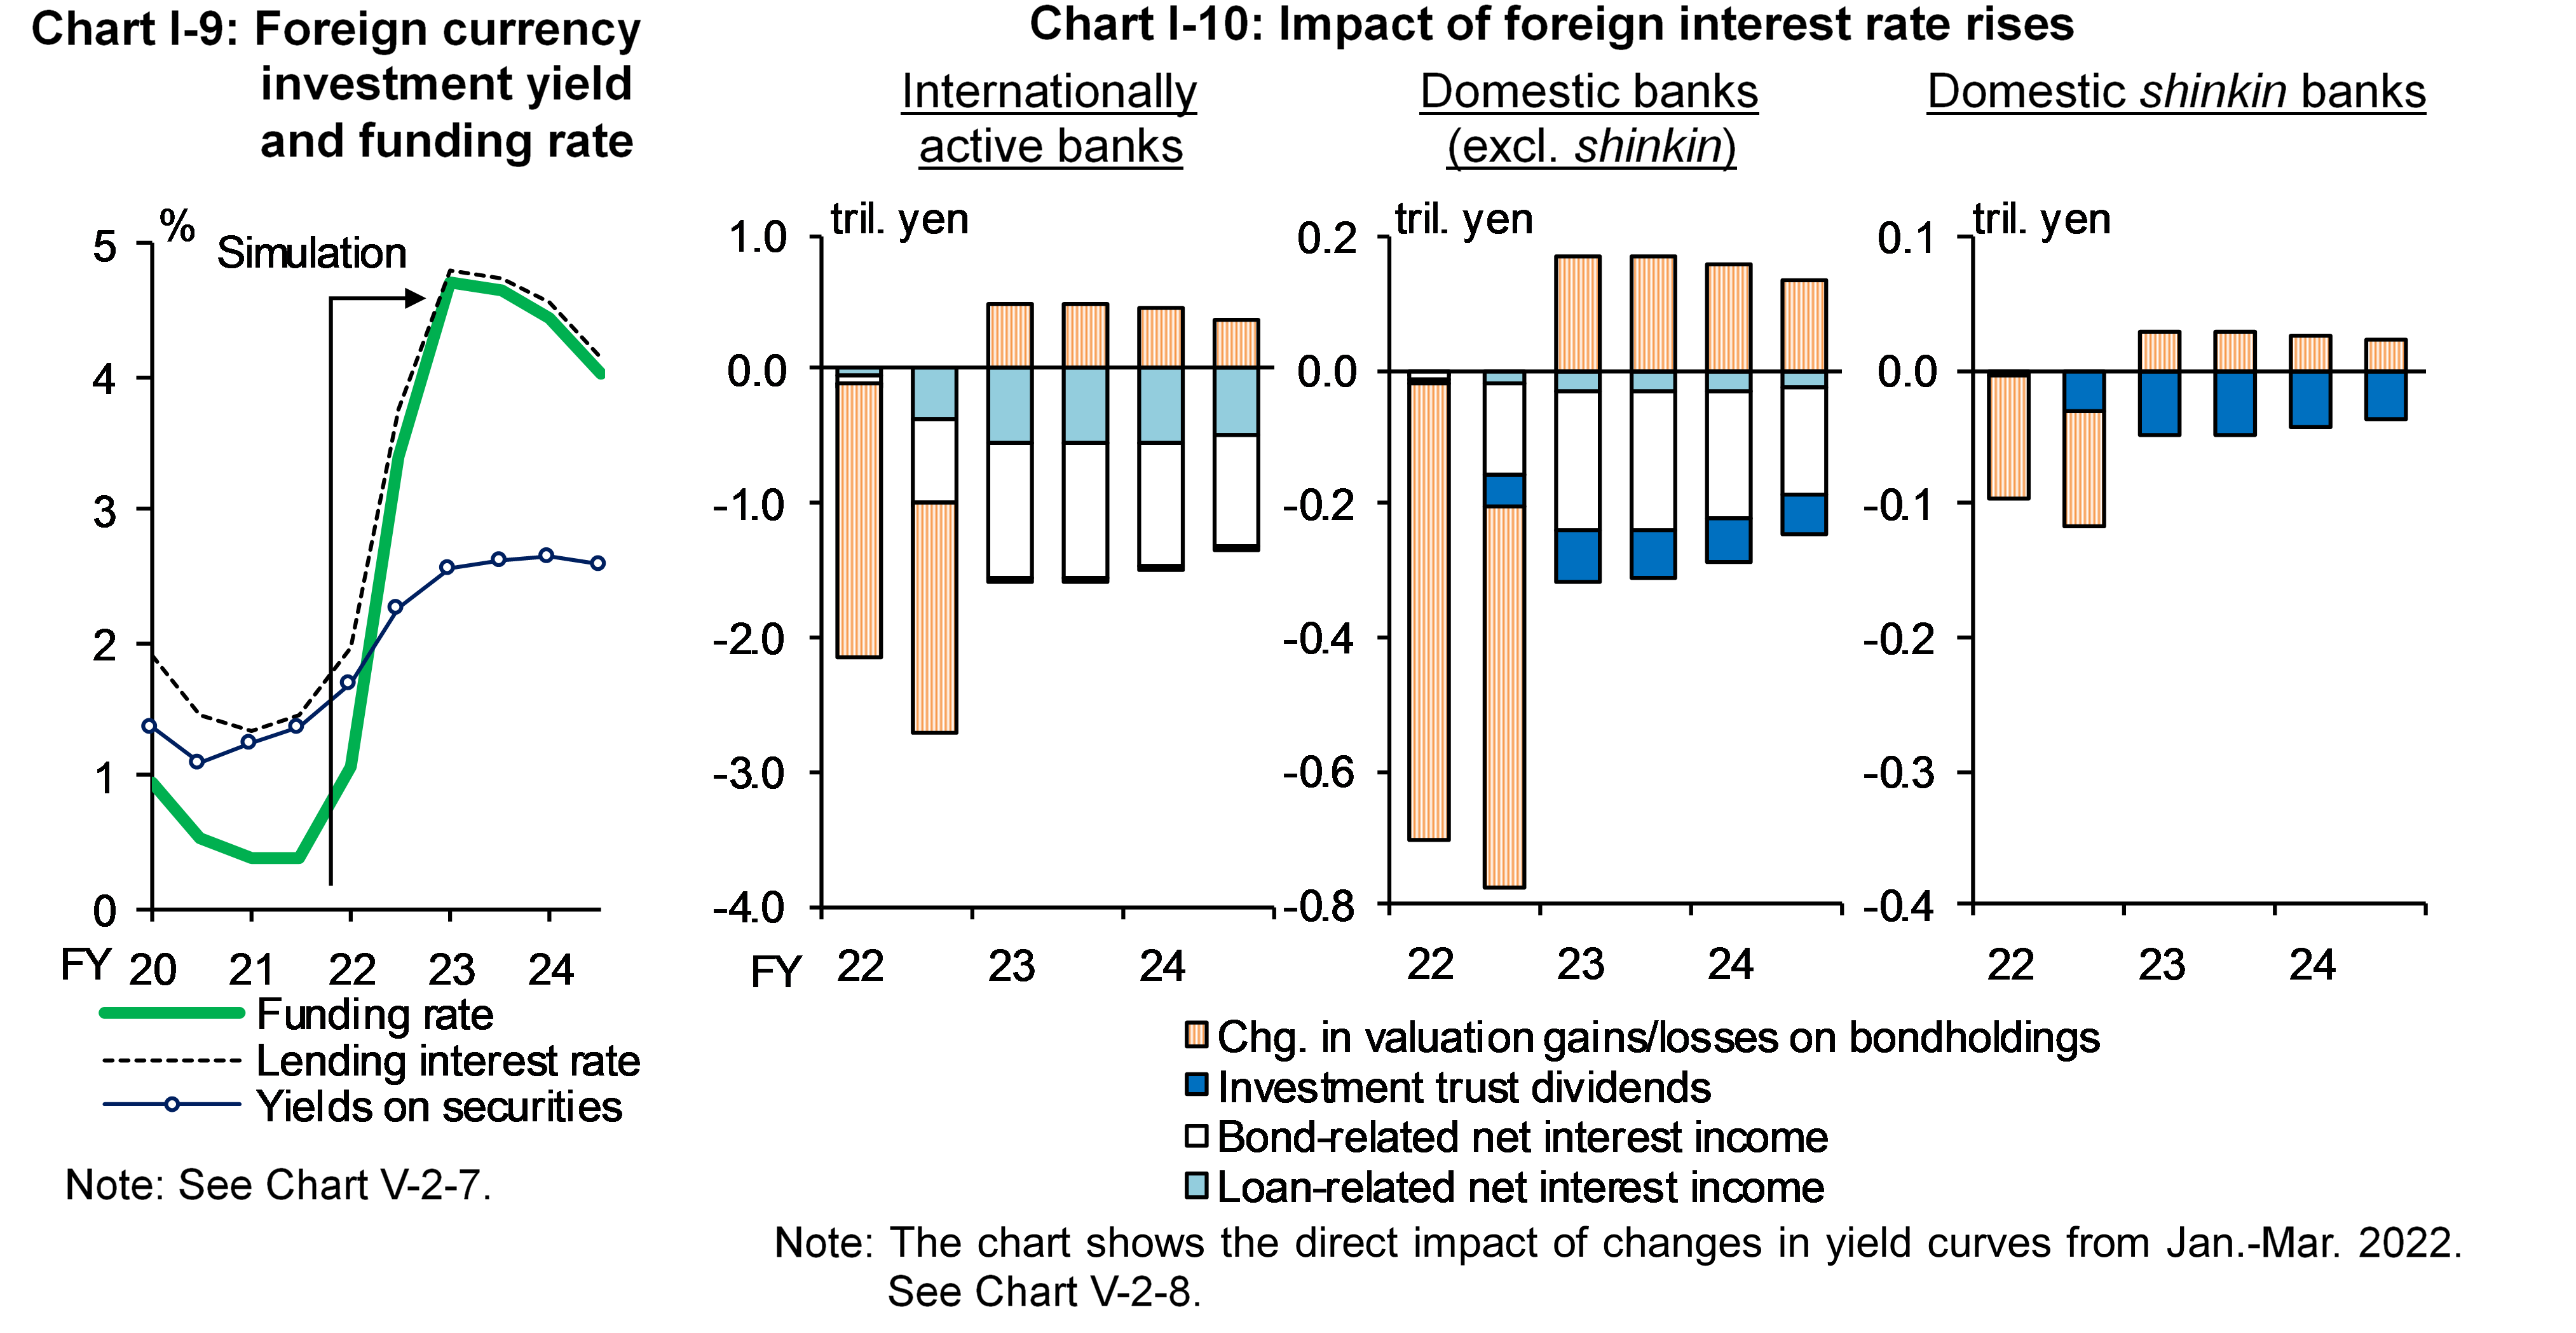 Chart I-9 shows Foreign currency investment yield and funding rate. Chart I-10 shows Impact of foreign interest rate hikes.